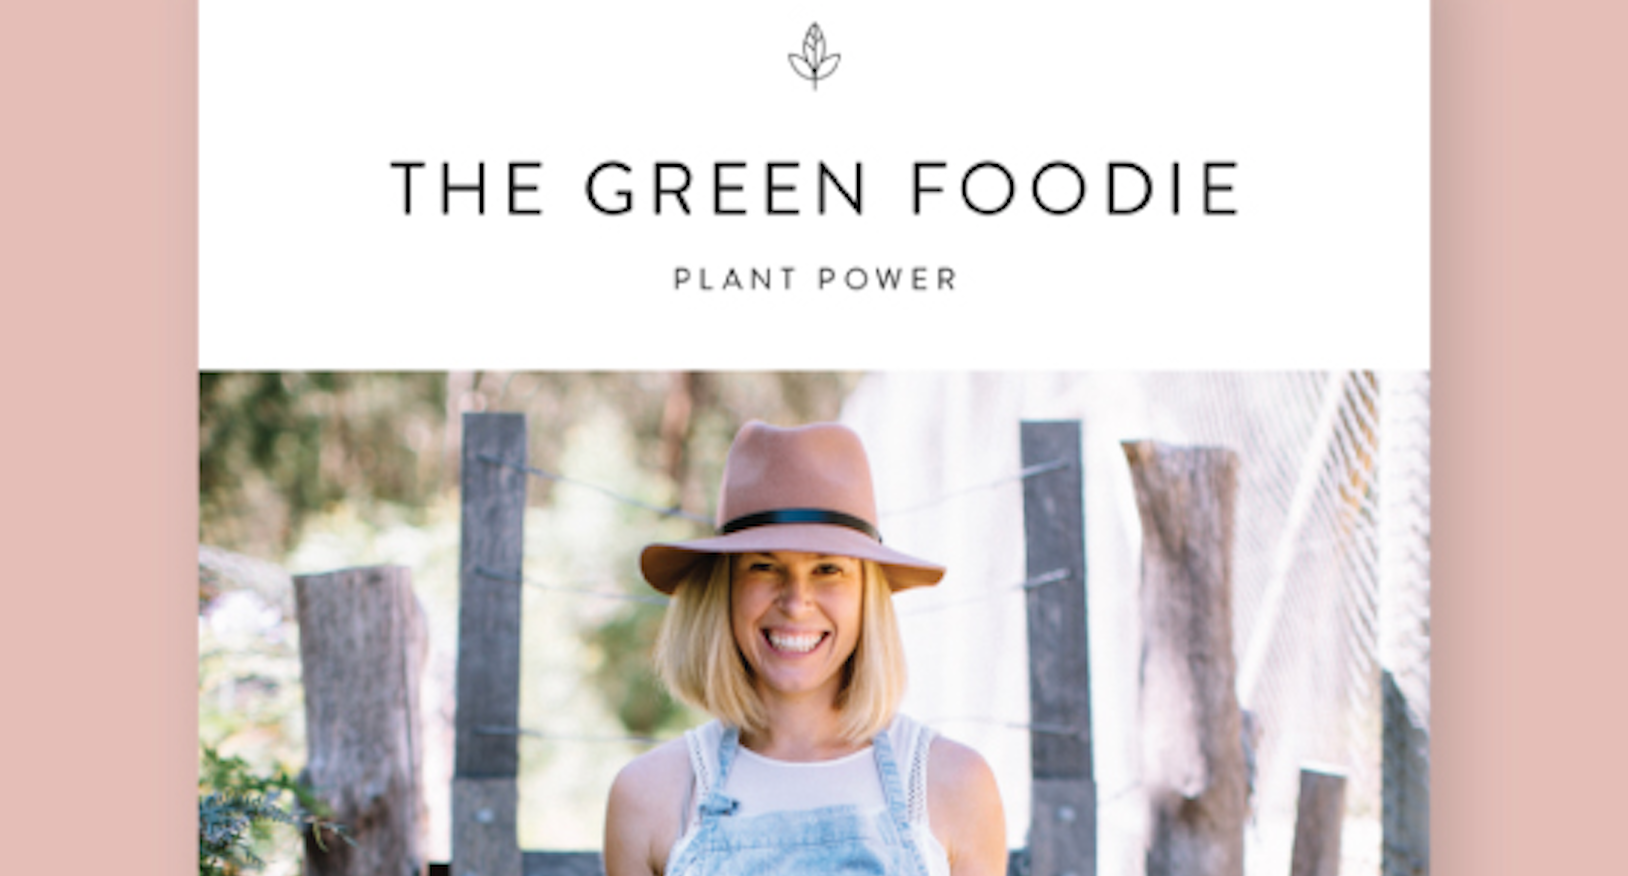 The Green Foodie Plant Power cookbook is here